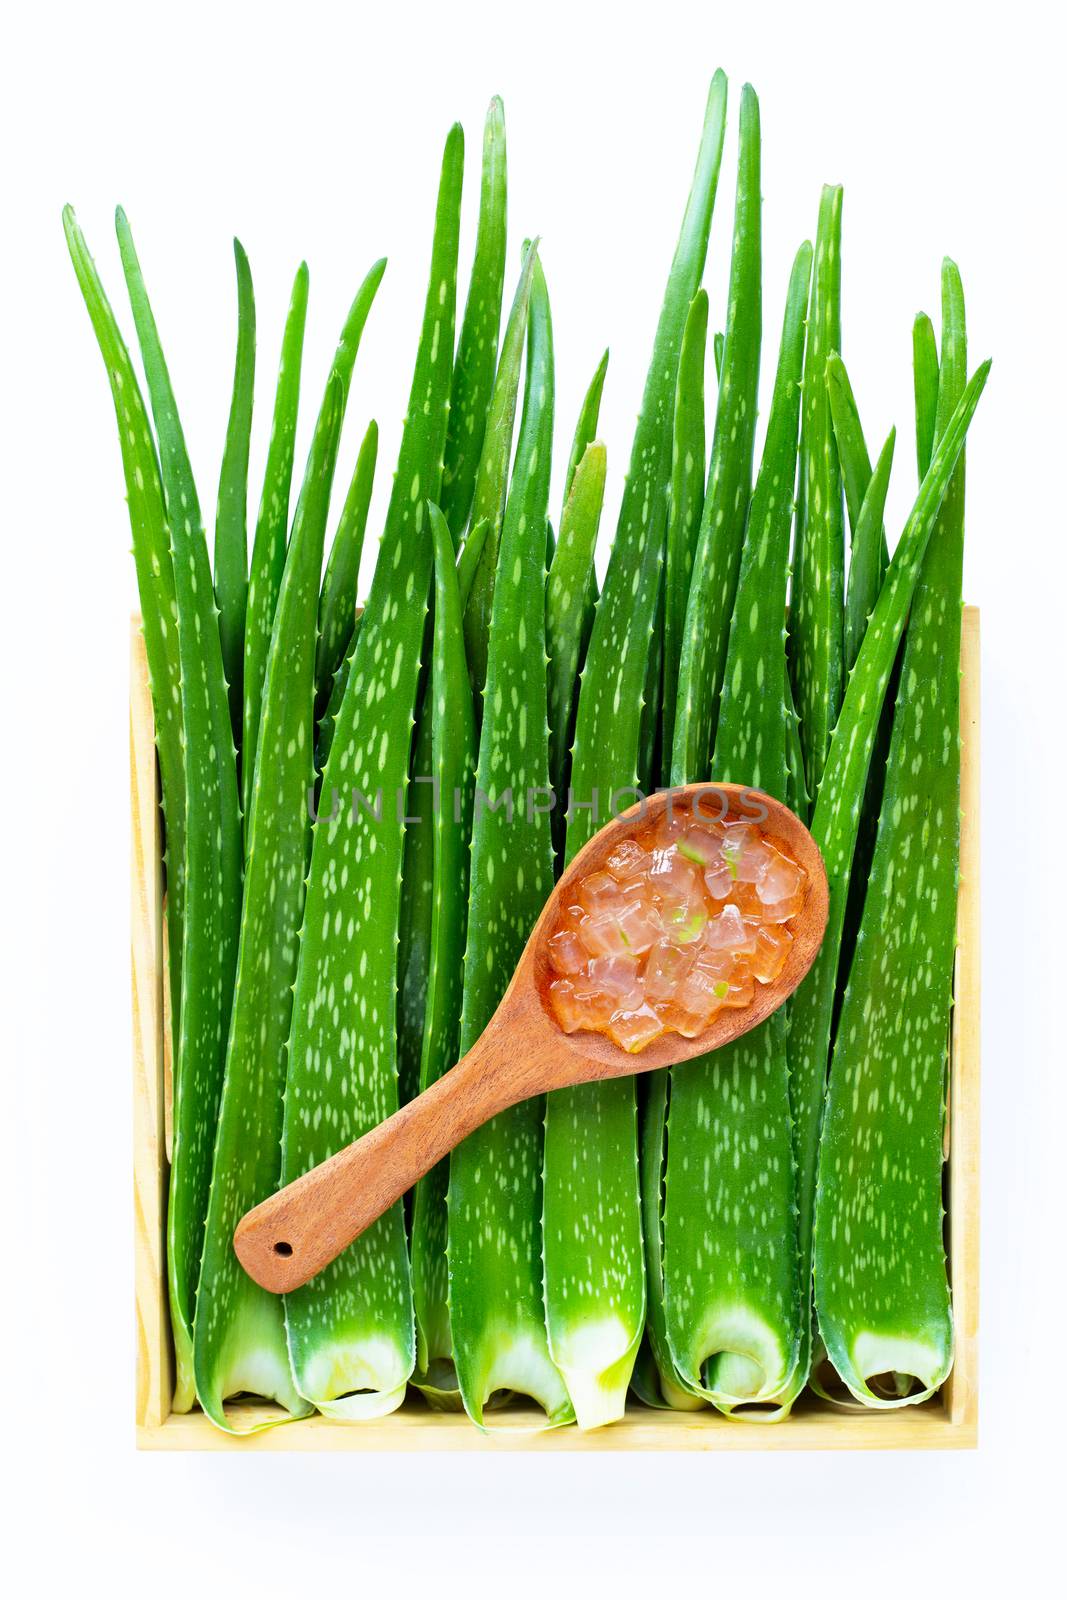 Aloe vera is a popular medicinal plant for health and beauty by Bowonpat